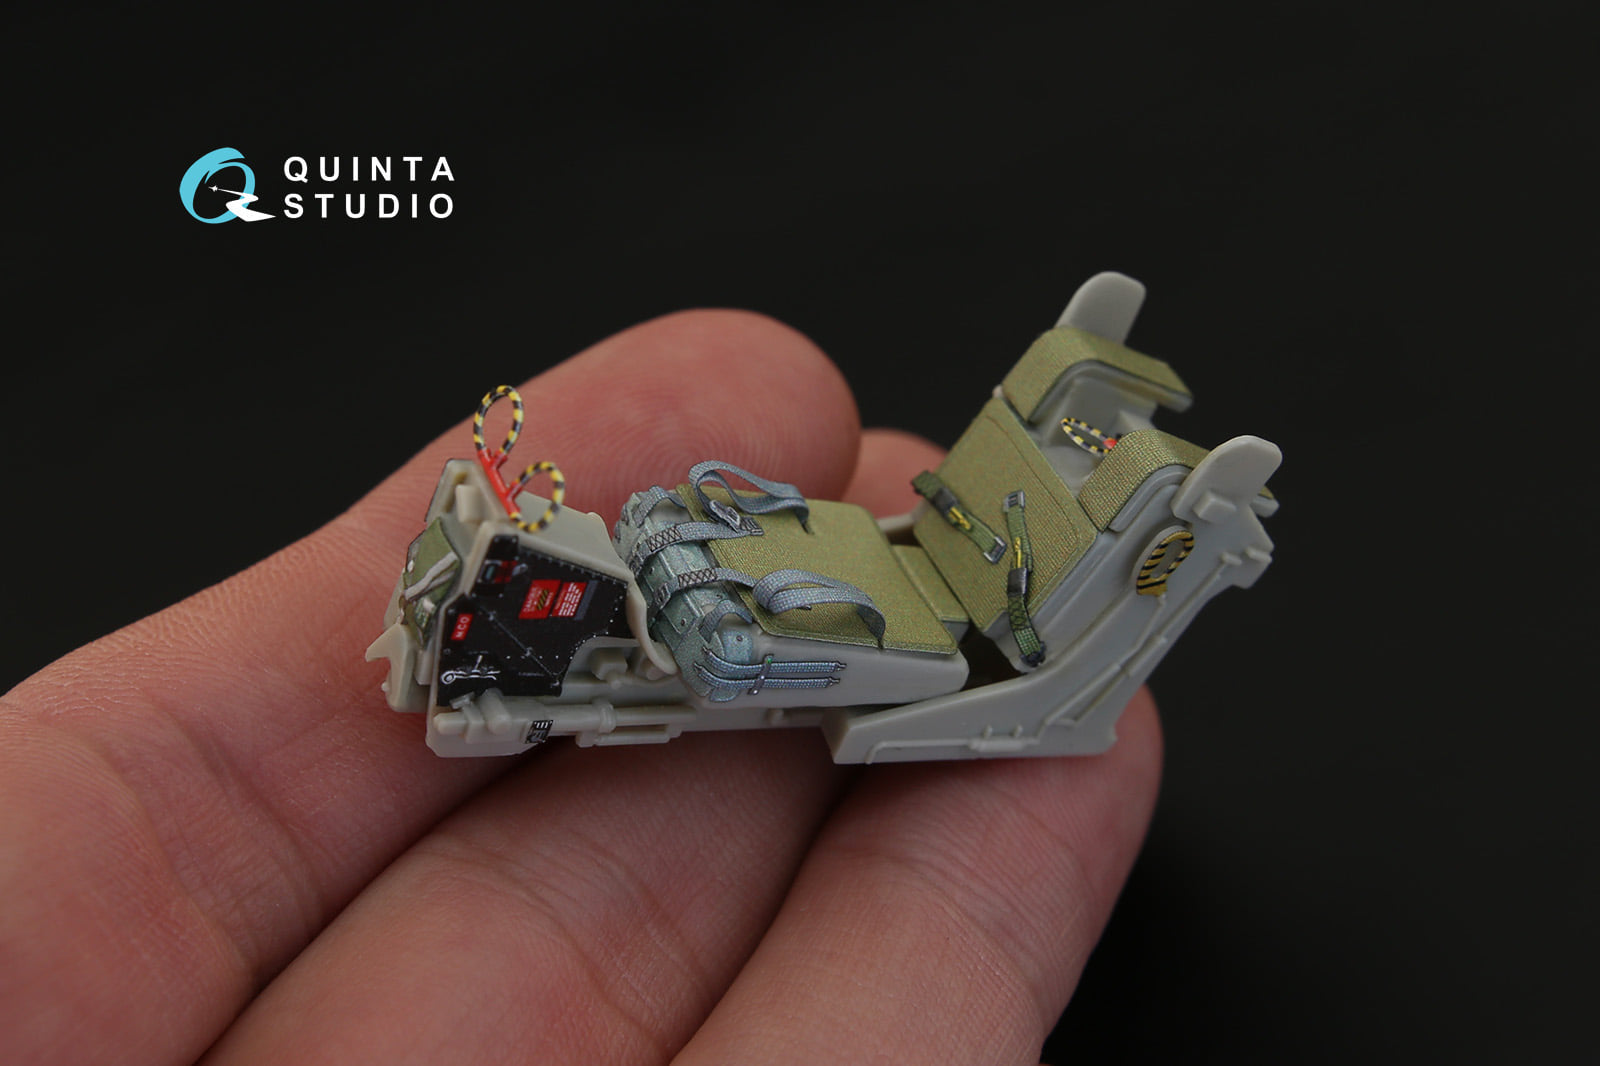 Quinta Studio - 1/32 GRU-7A ejection seats for F-14A (2 pieces) QR32003 for Tamiya kit